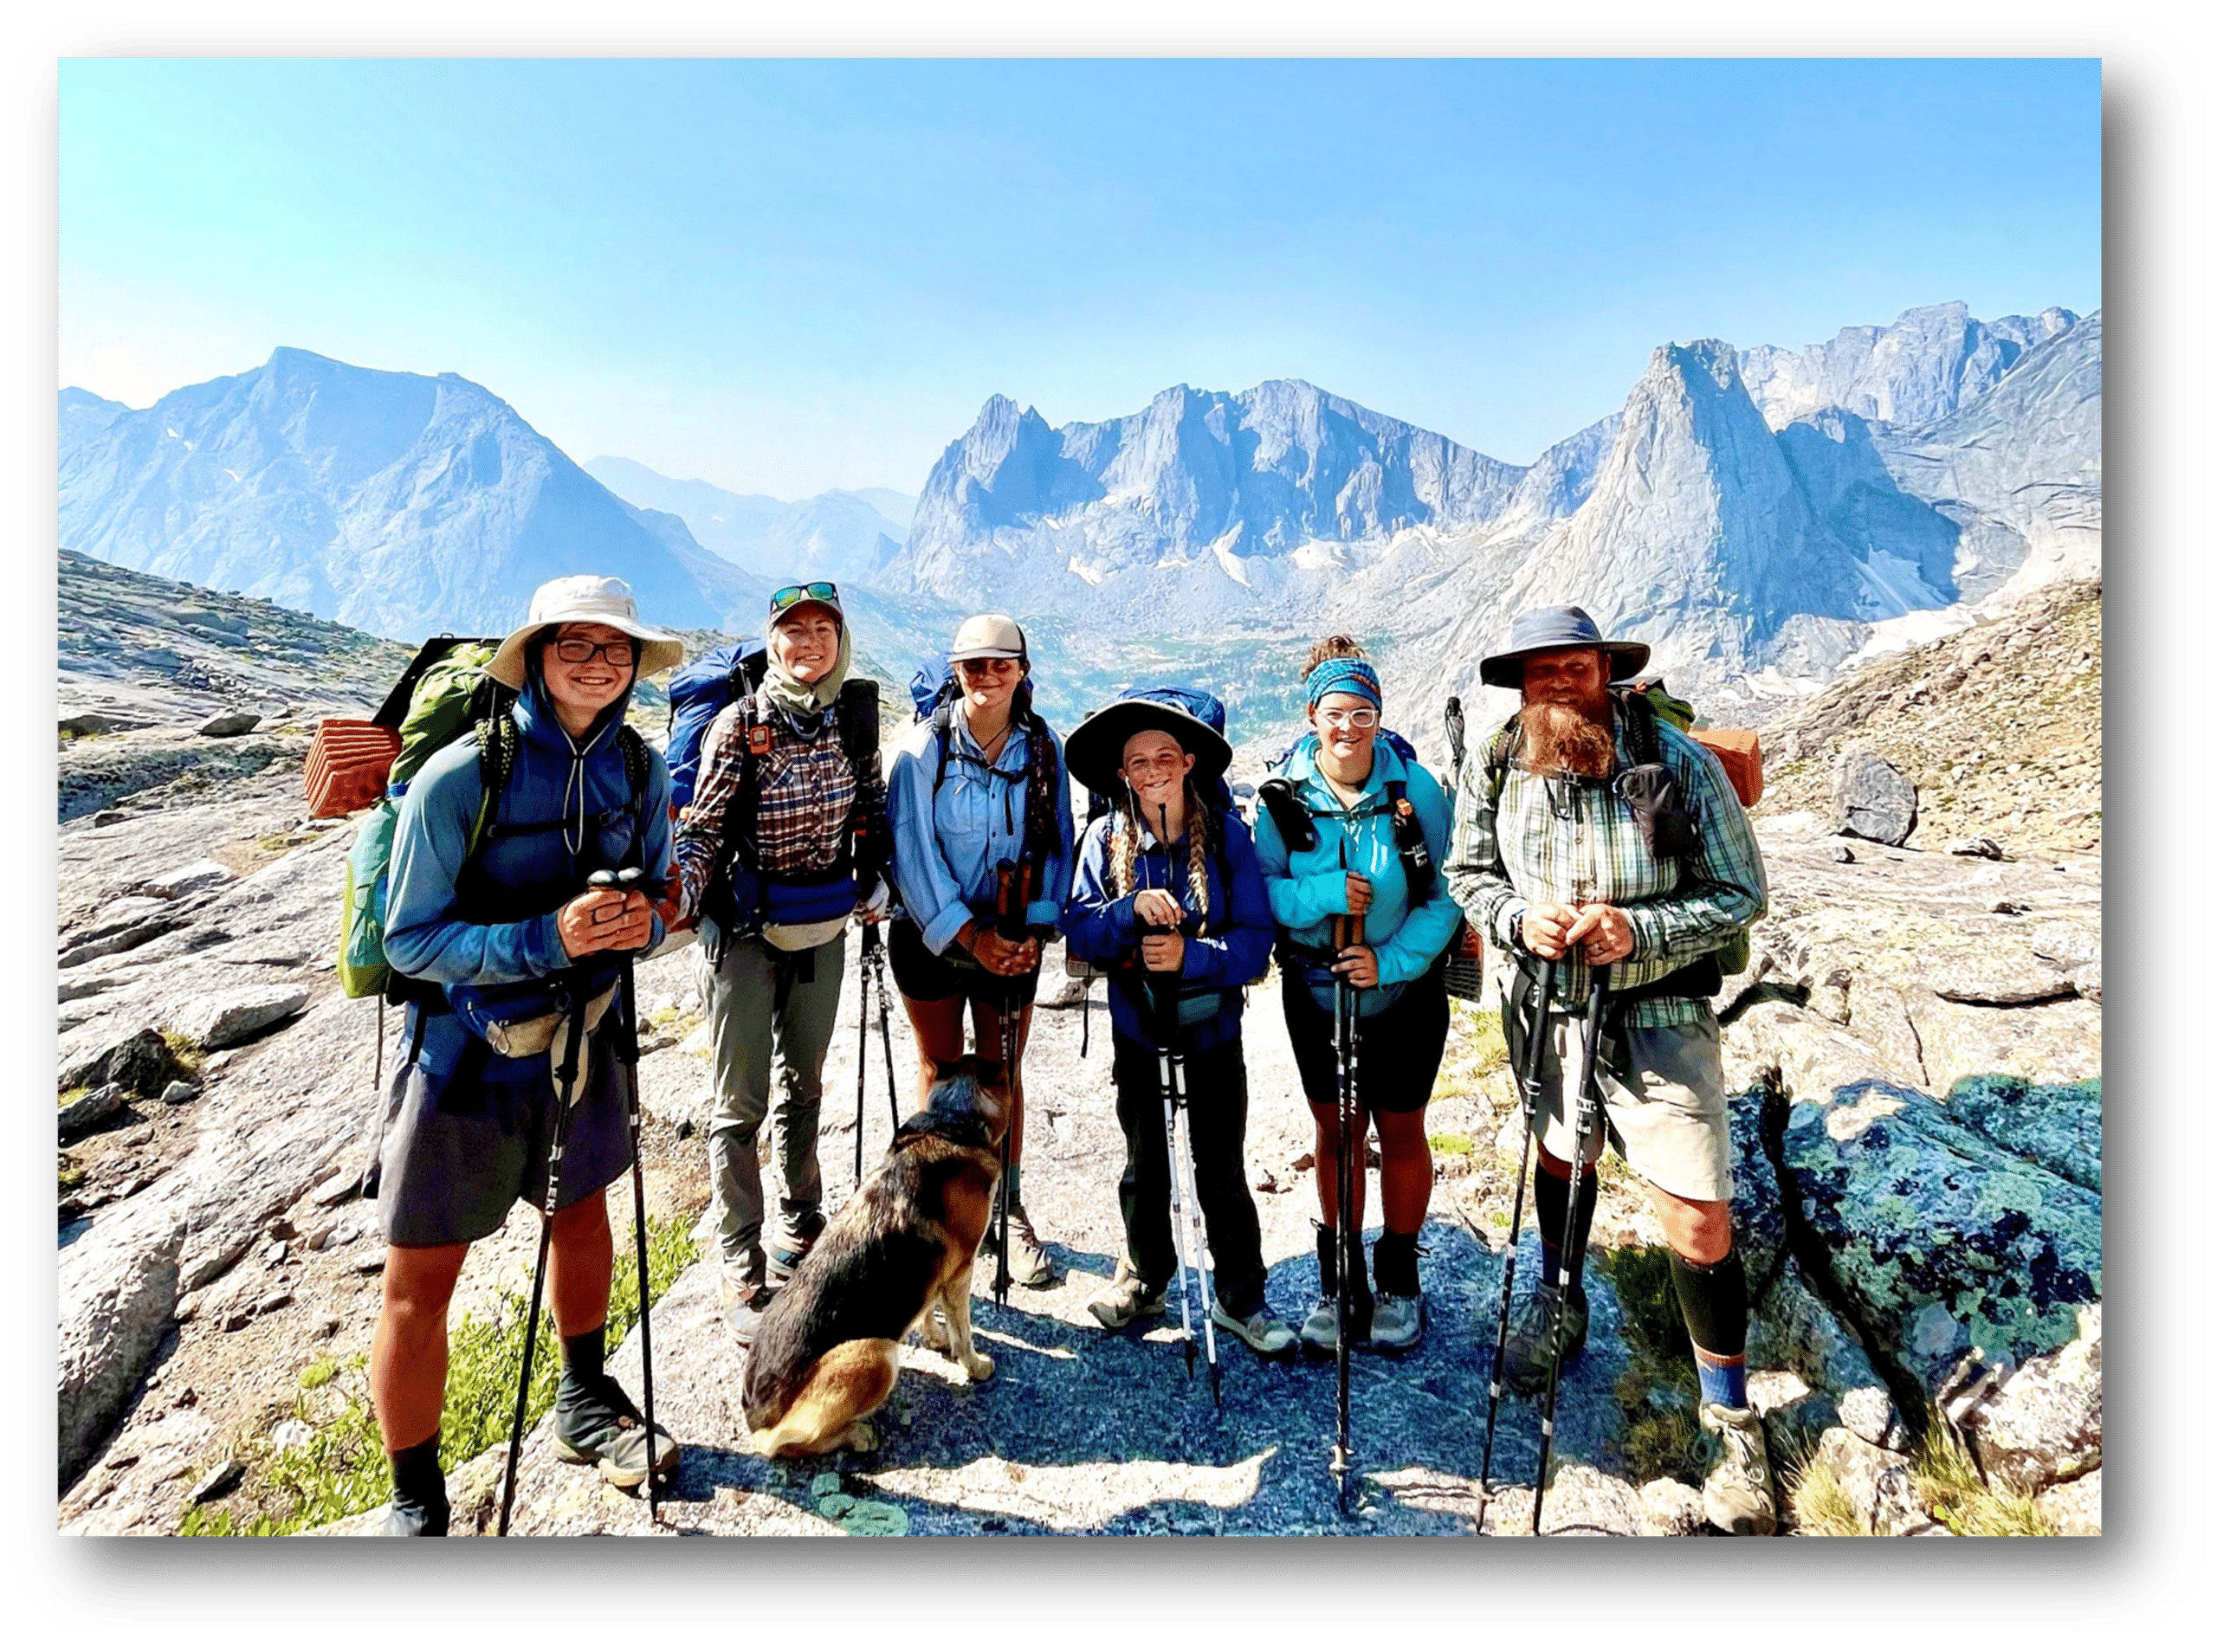 6 people and a dog smile on a mountain trail while wearing backpacking gear